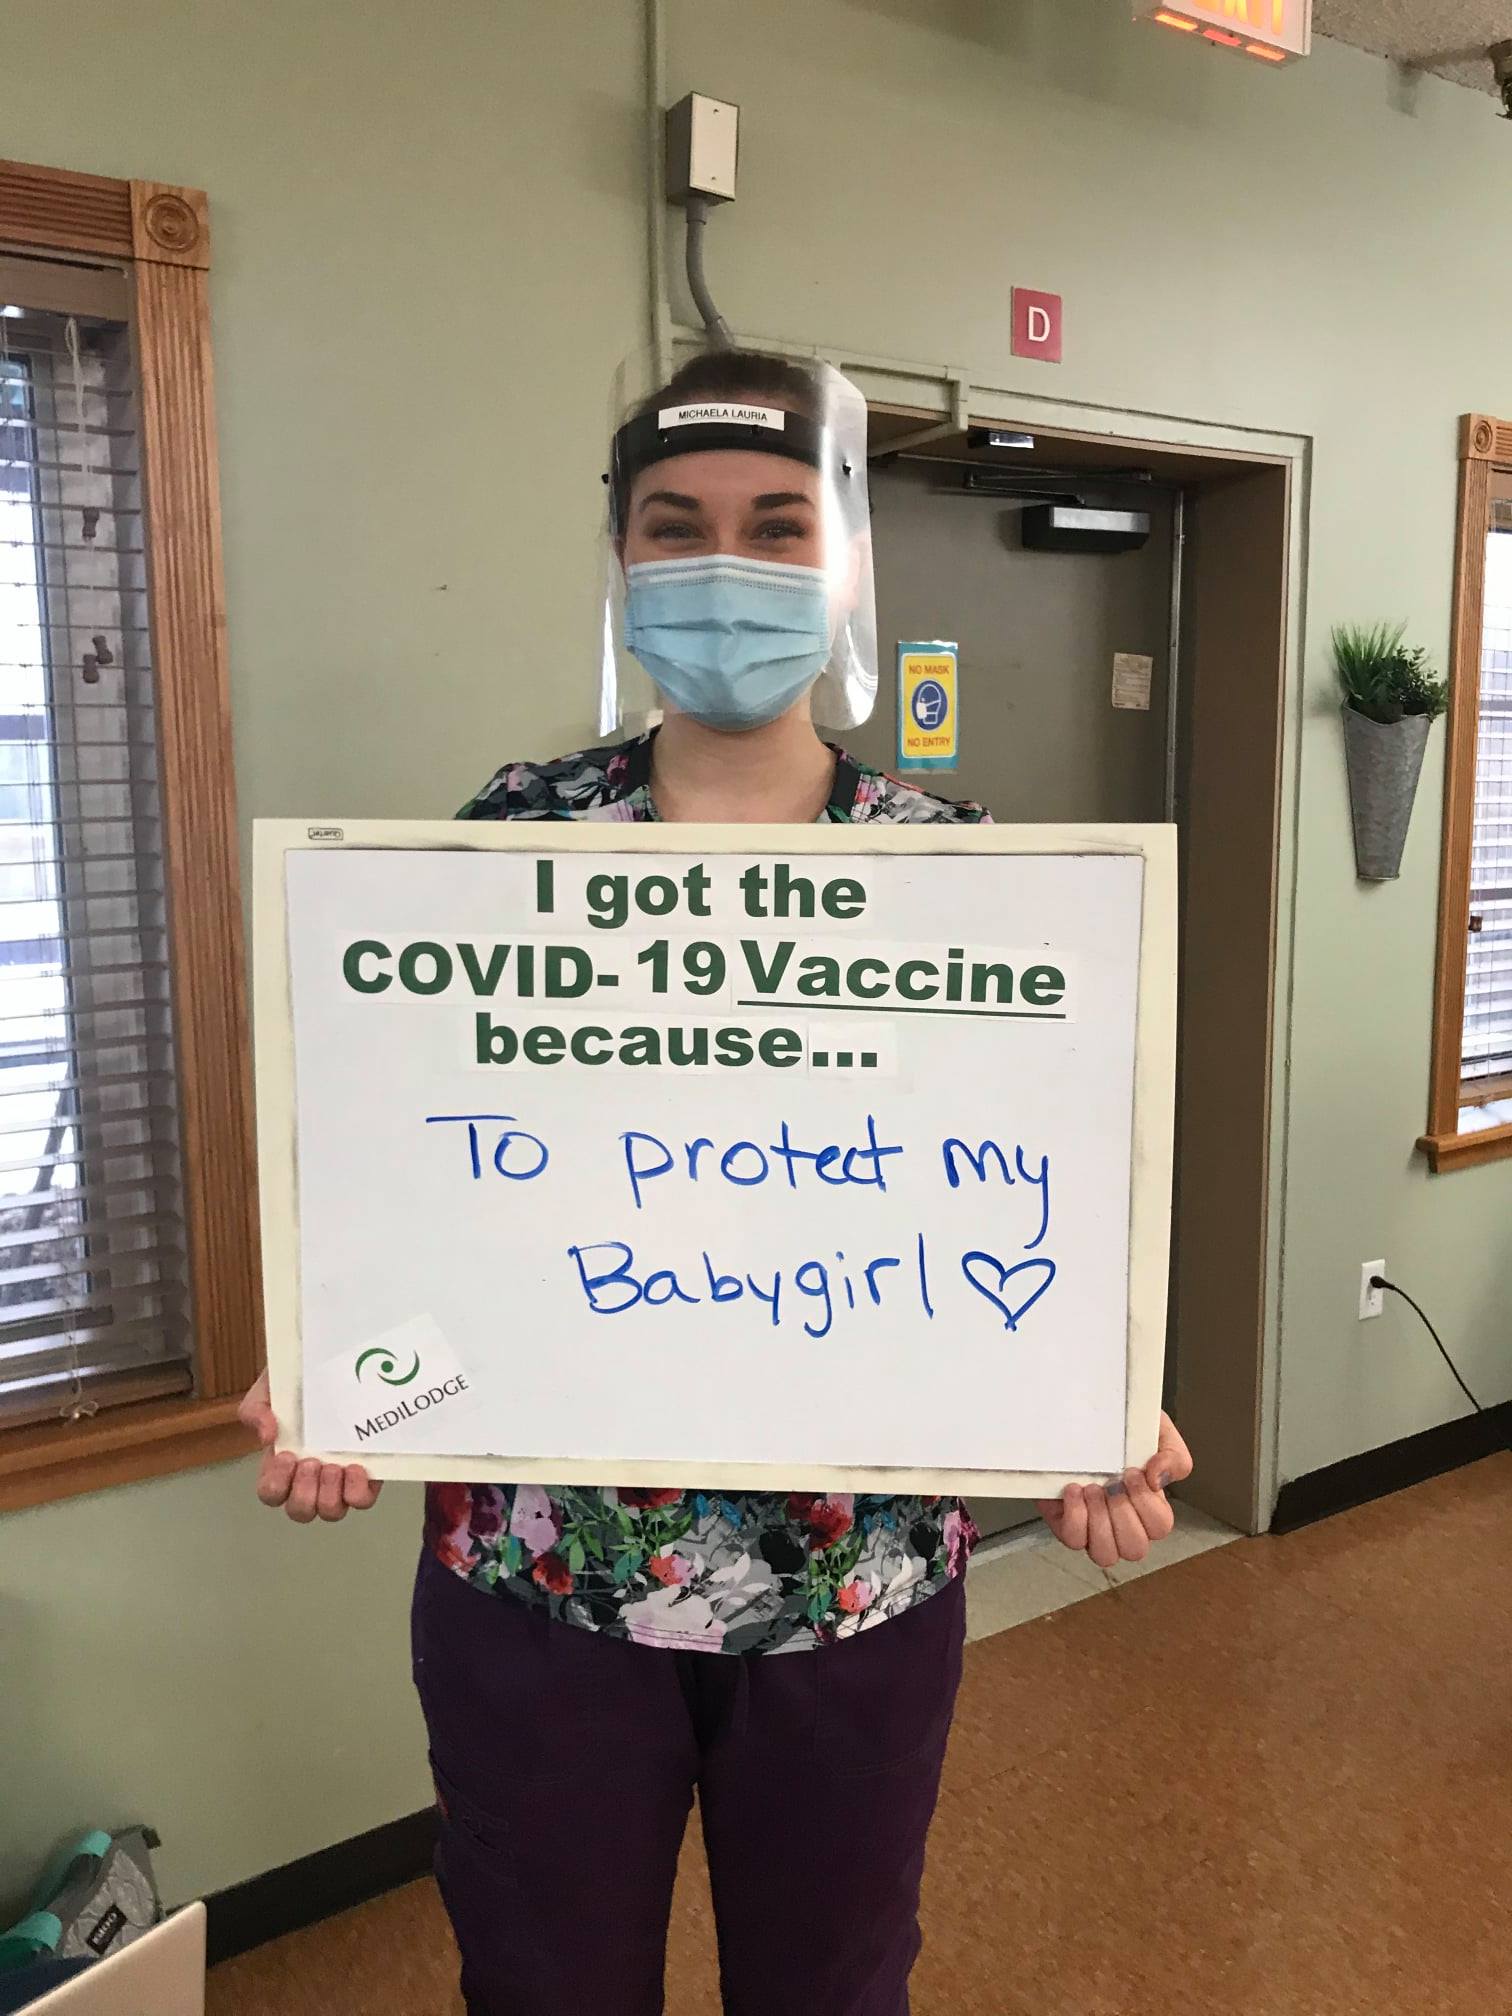 I got the COVID-19 vaccine because to protect my baby girl